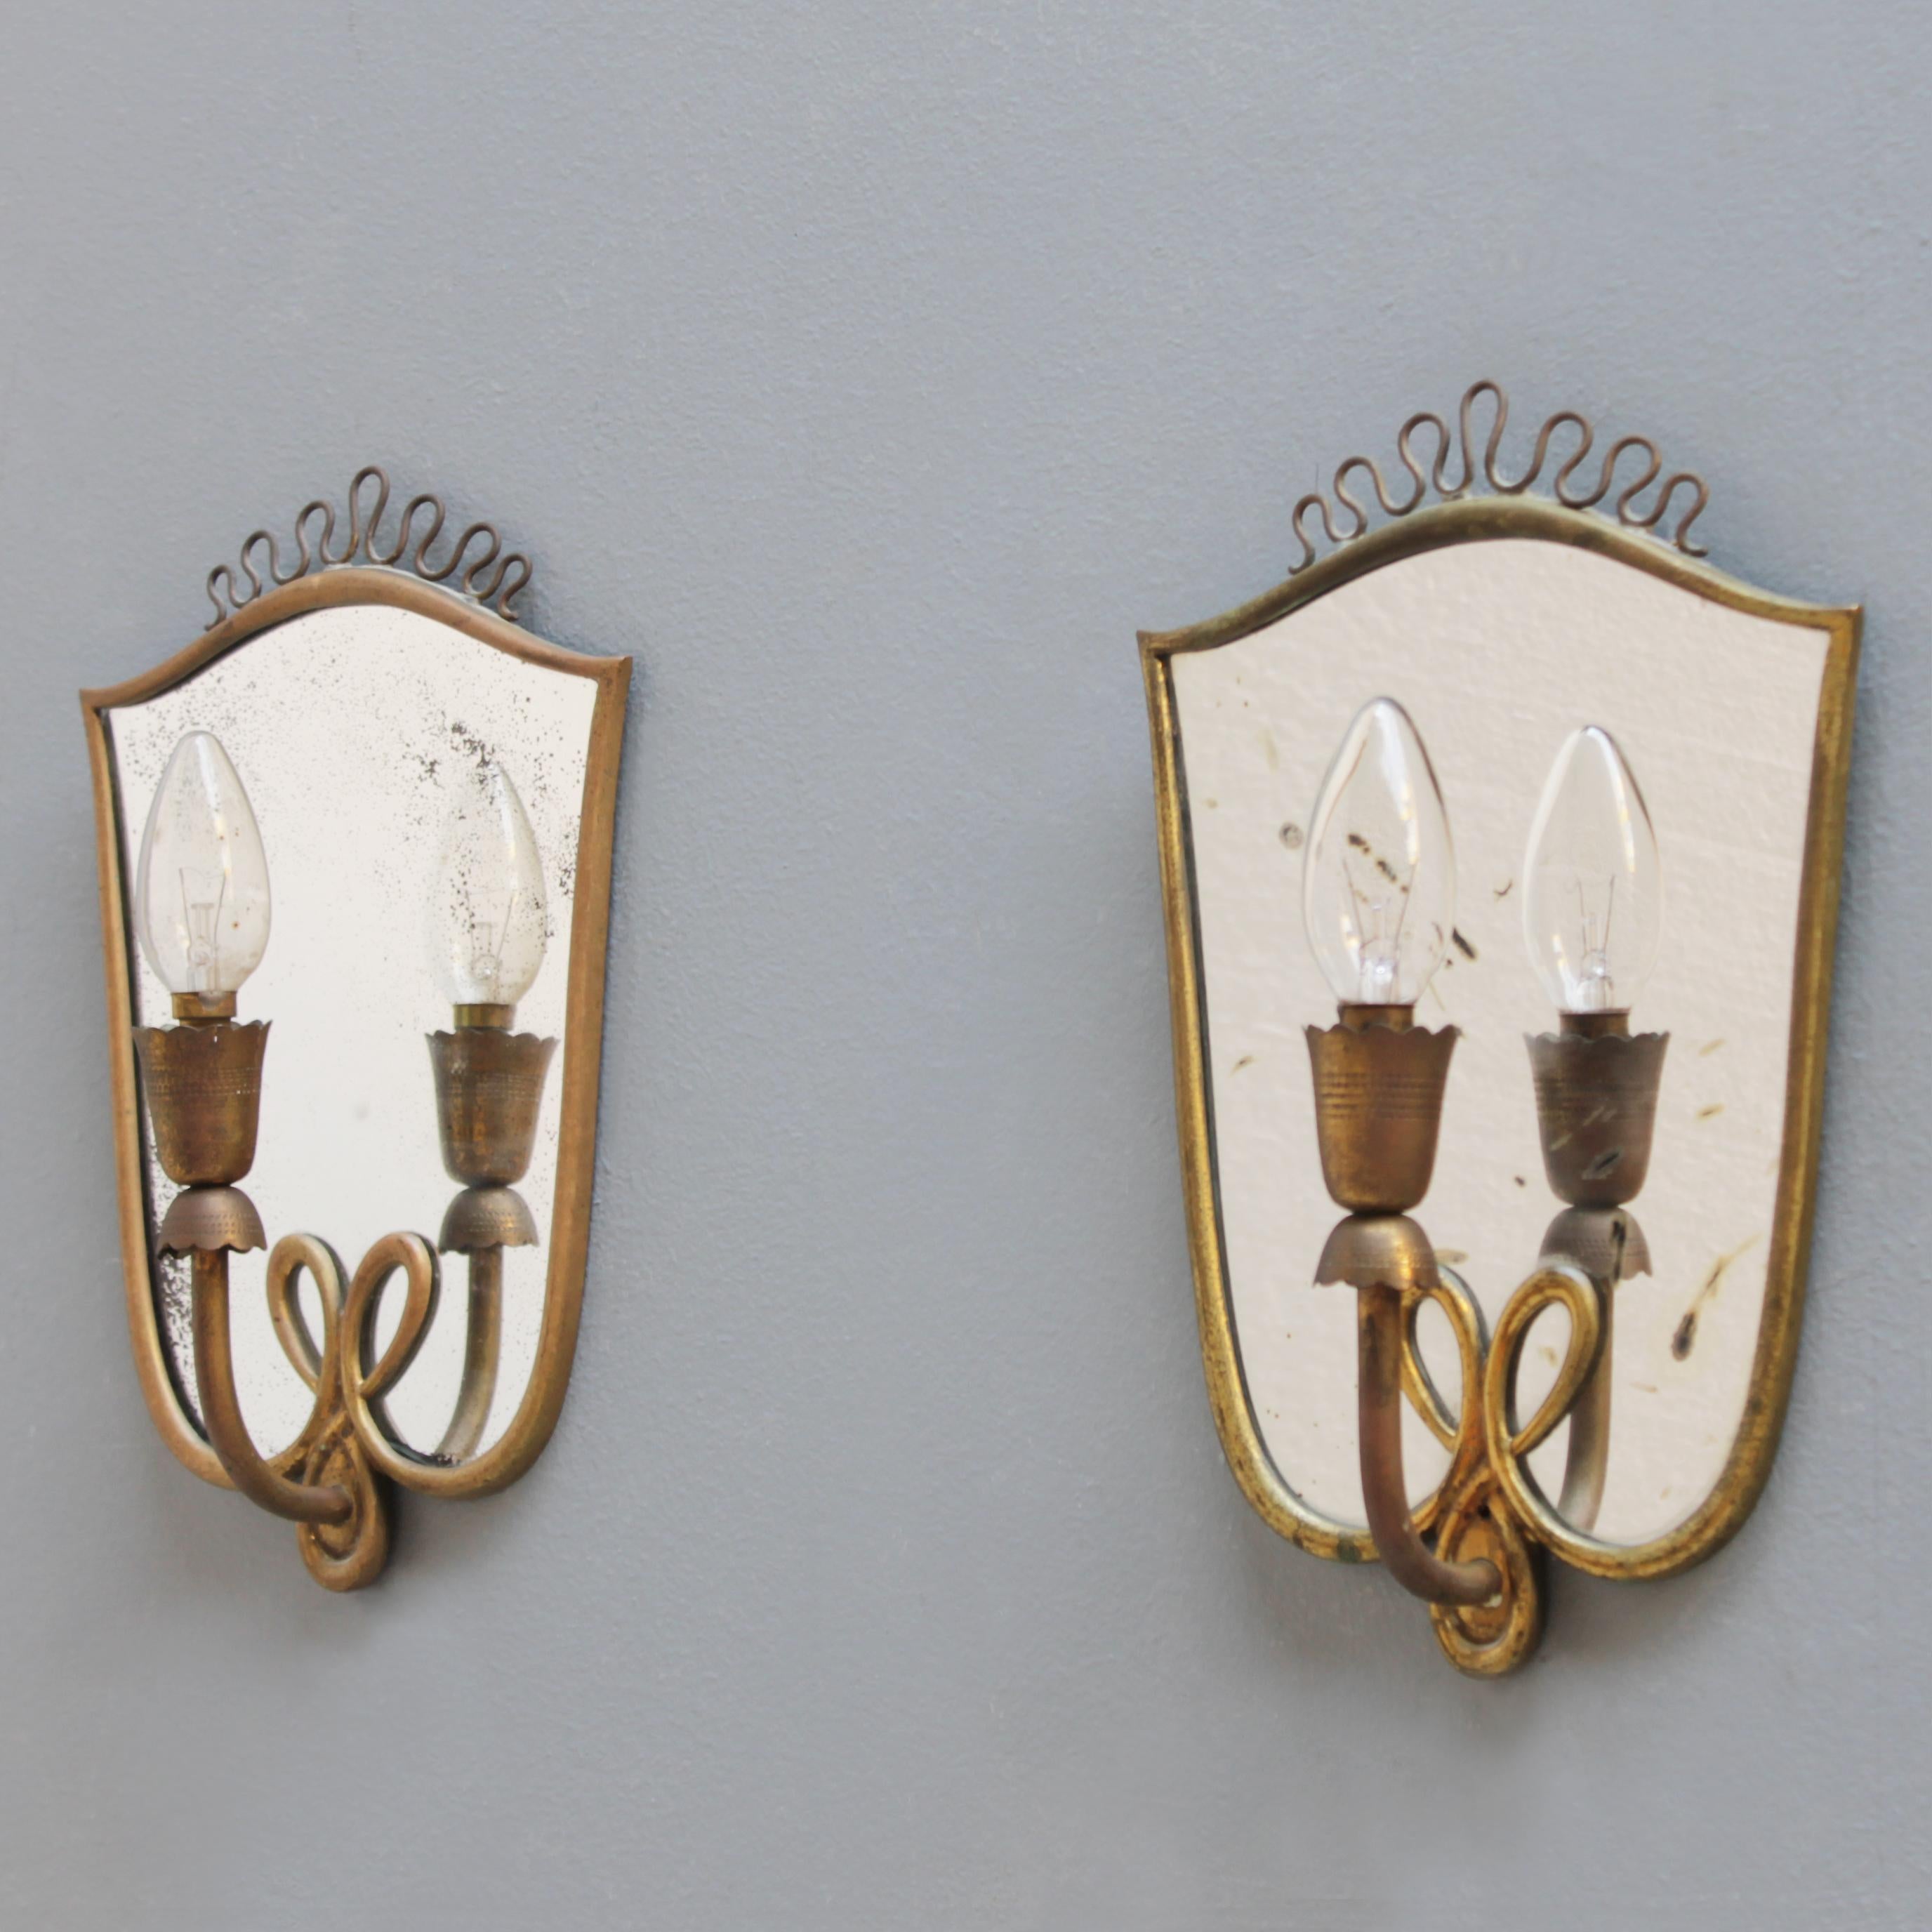 A pair of patinated mirror sconces, executed in the typical Italian Art Deco style of the 1940s and early 1950s.
The fixture is equipped with small Edison screw sockets (SES), (E17 14-17 mm) max 40 watt, works in the USA.
Dimensions: height 11.8